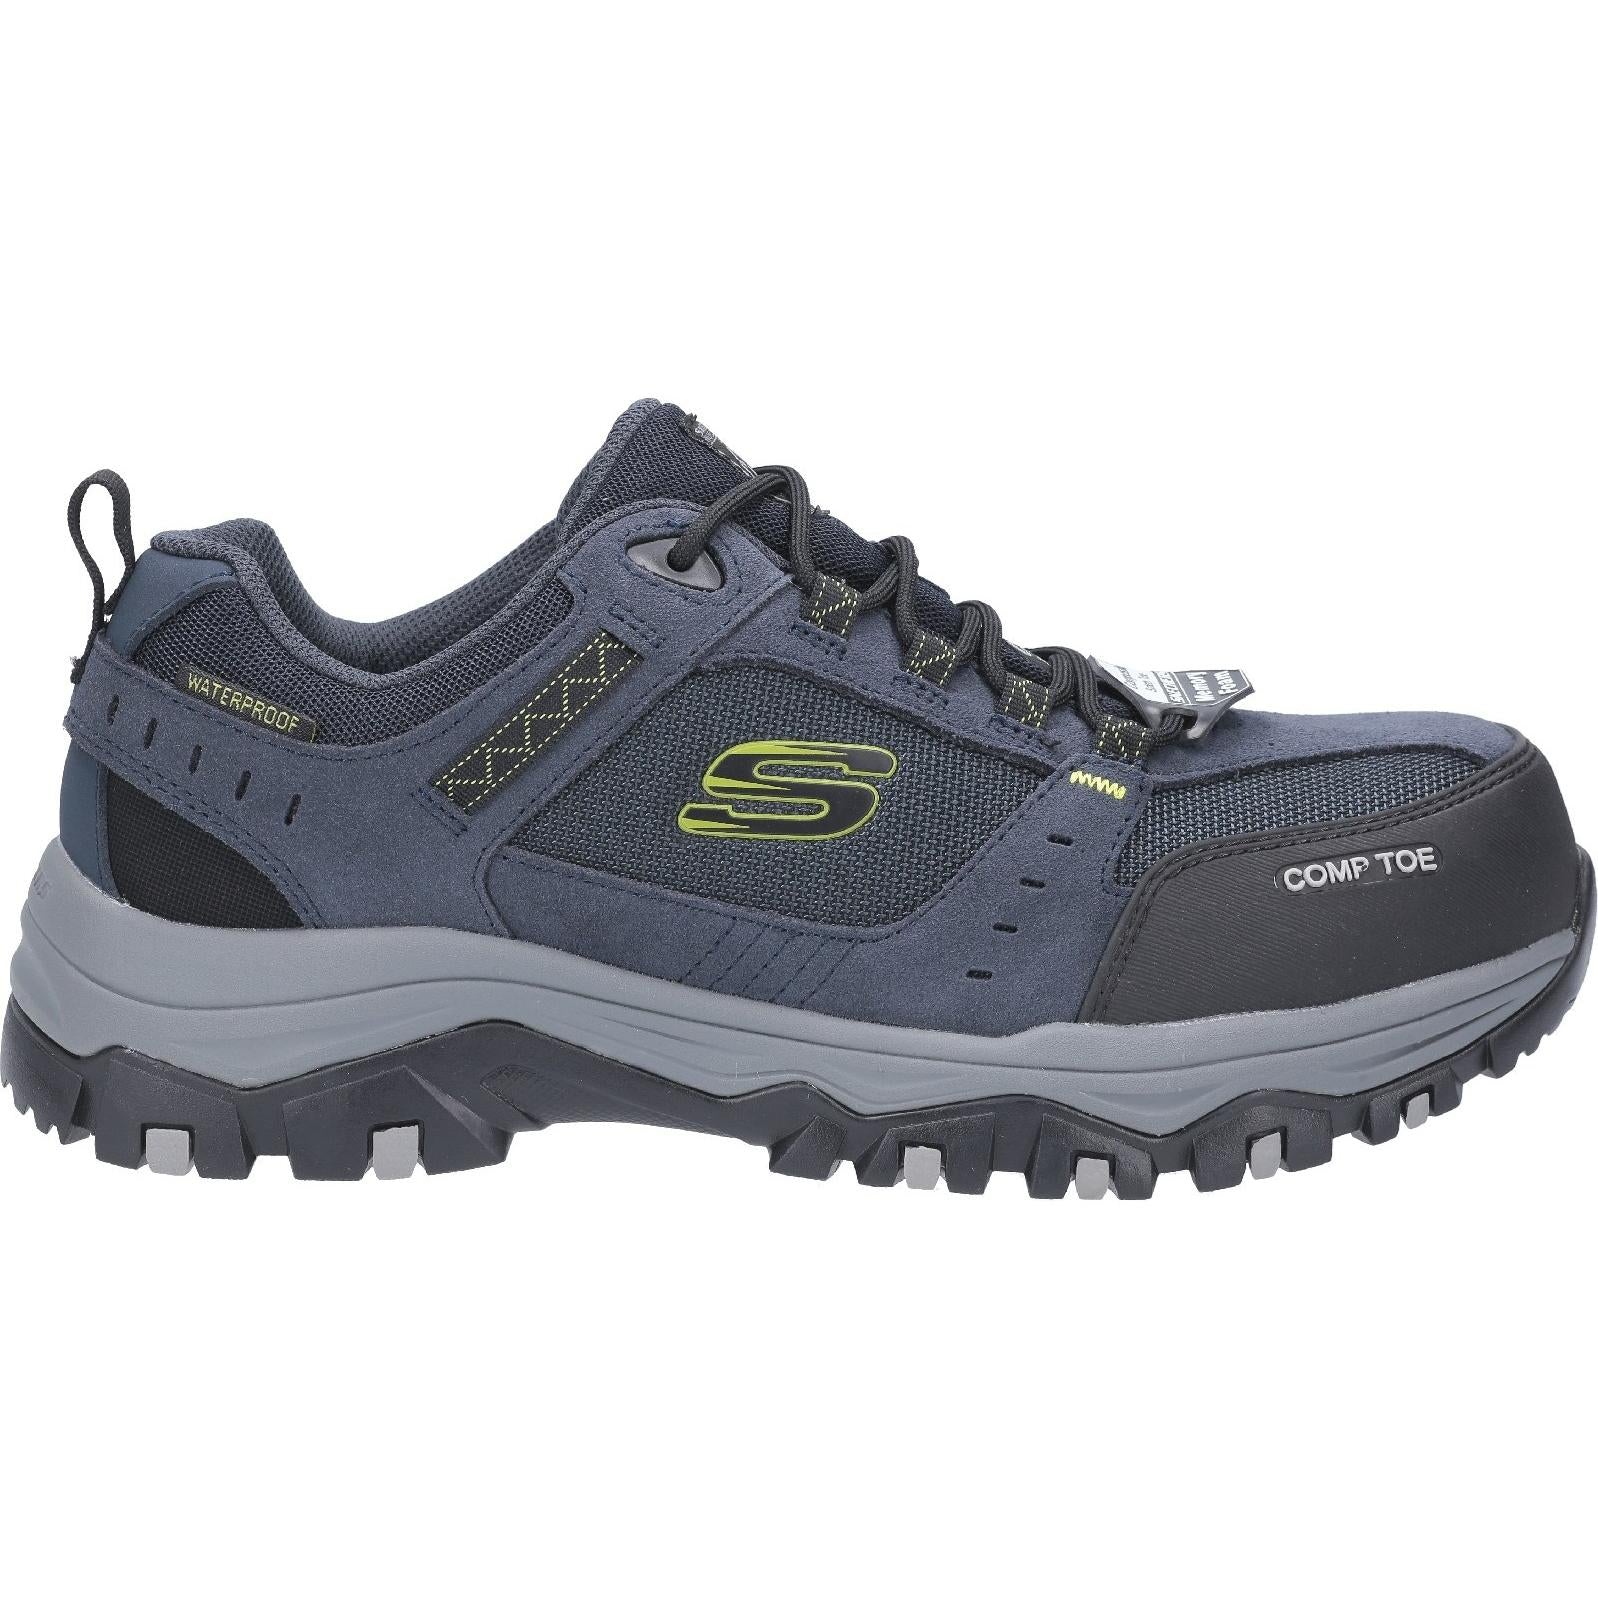 Skechers Greetah Safety Hiker with Composite Toe Trainers